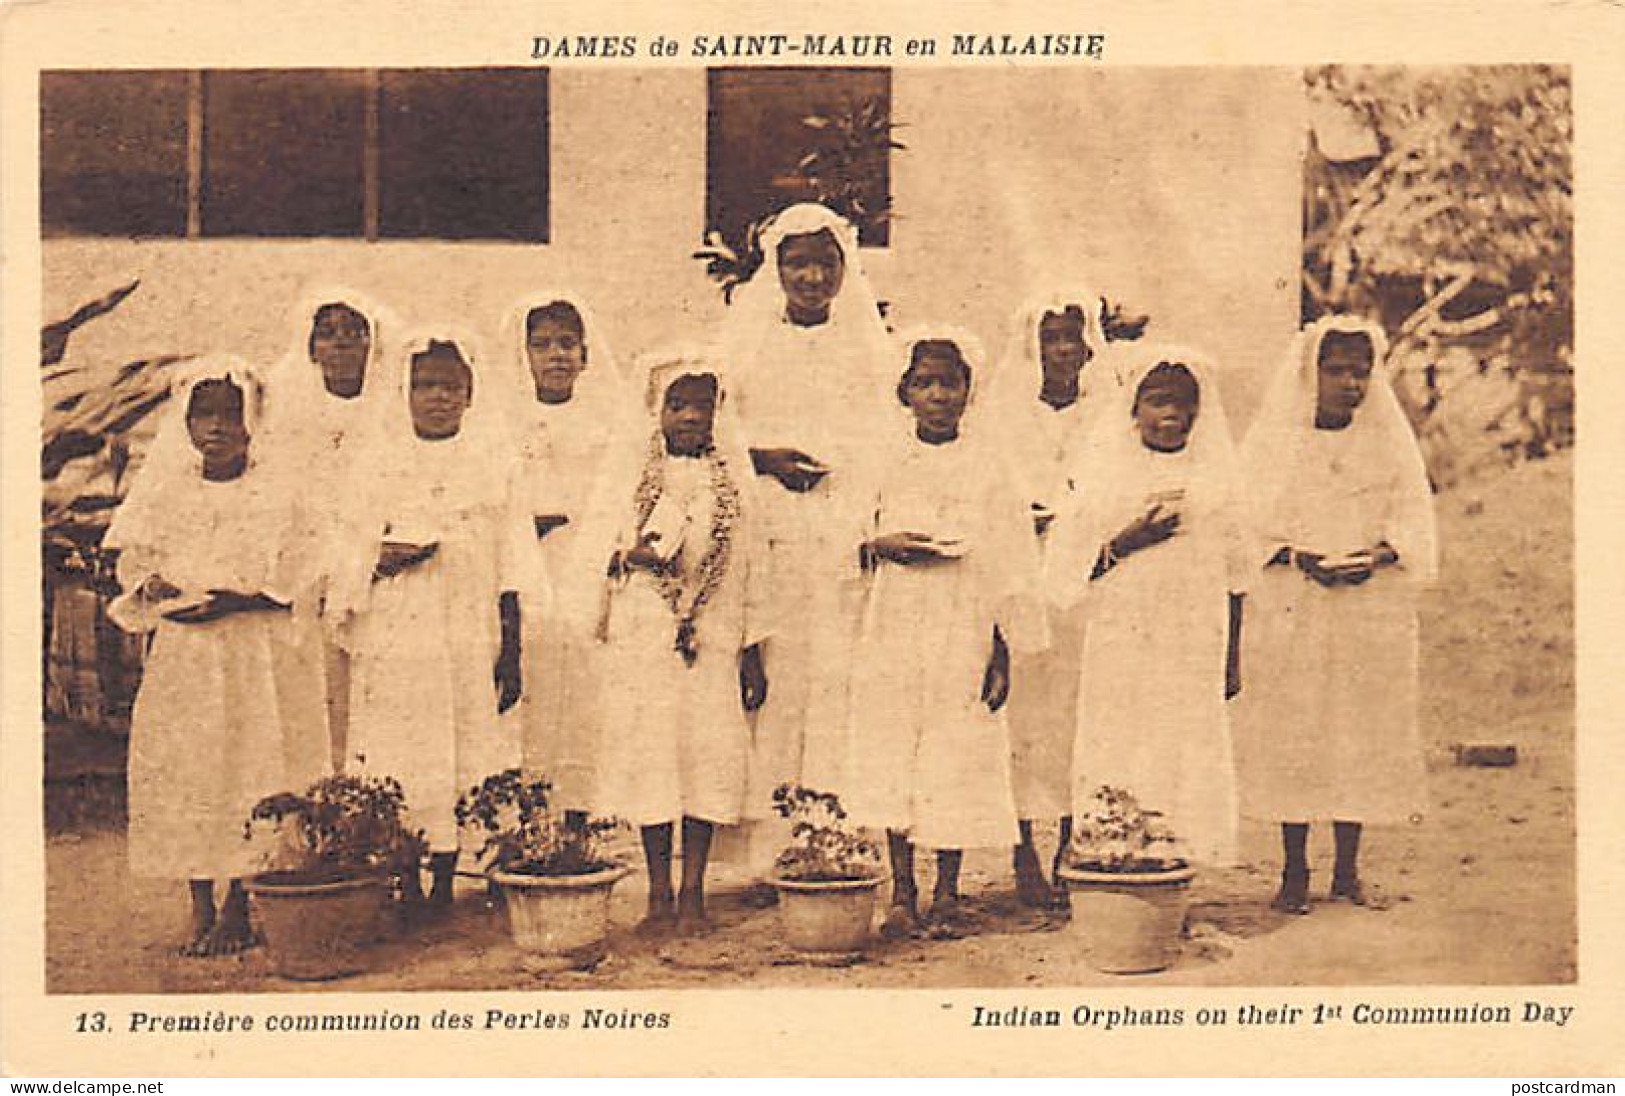 Malaysia - PENANG - First Communicants - Publ. Saint-Maur Ladies Orphanage In Malaysia 13 - Malasia